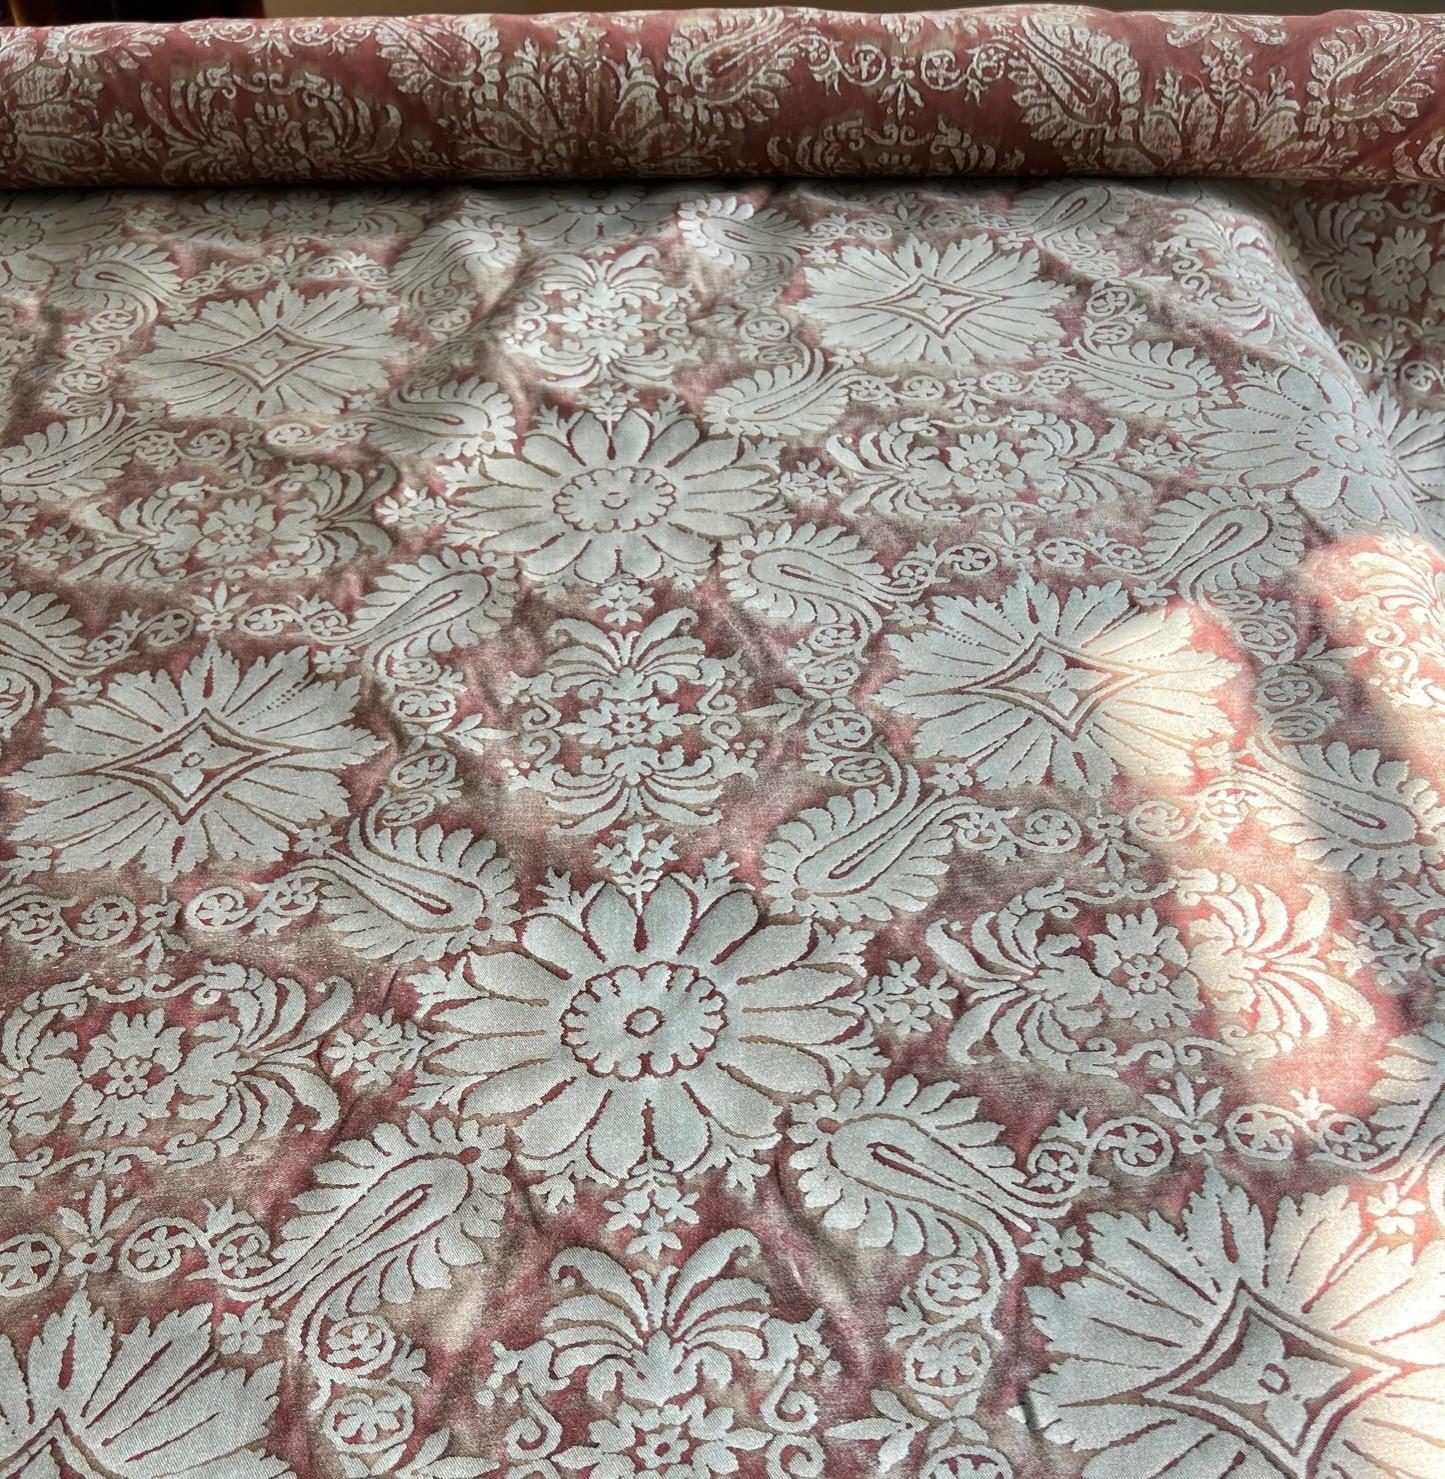 Venetian Fortuny Impero Fabric in Copper and Silvery Gold 1